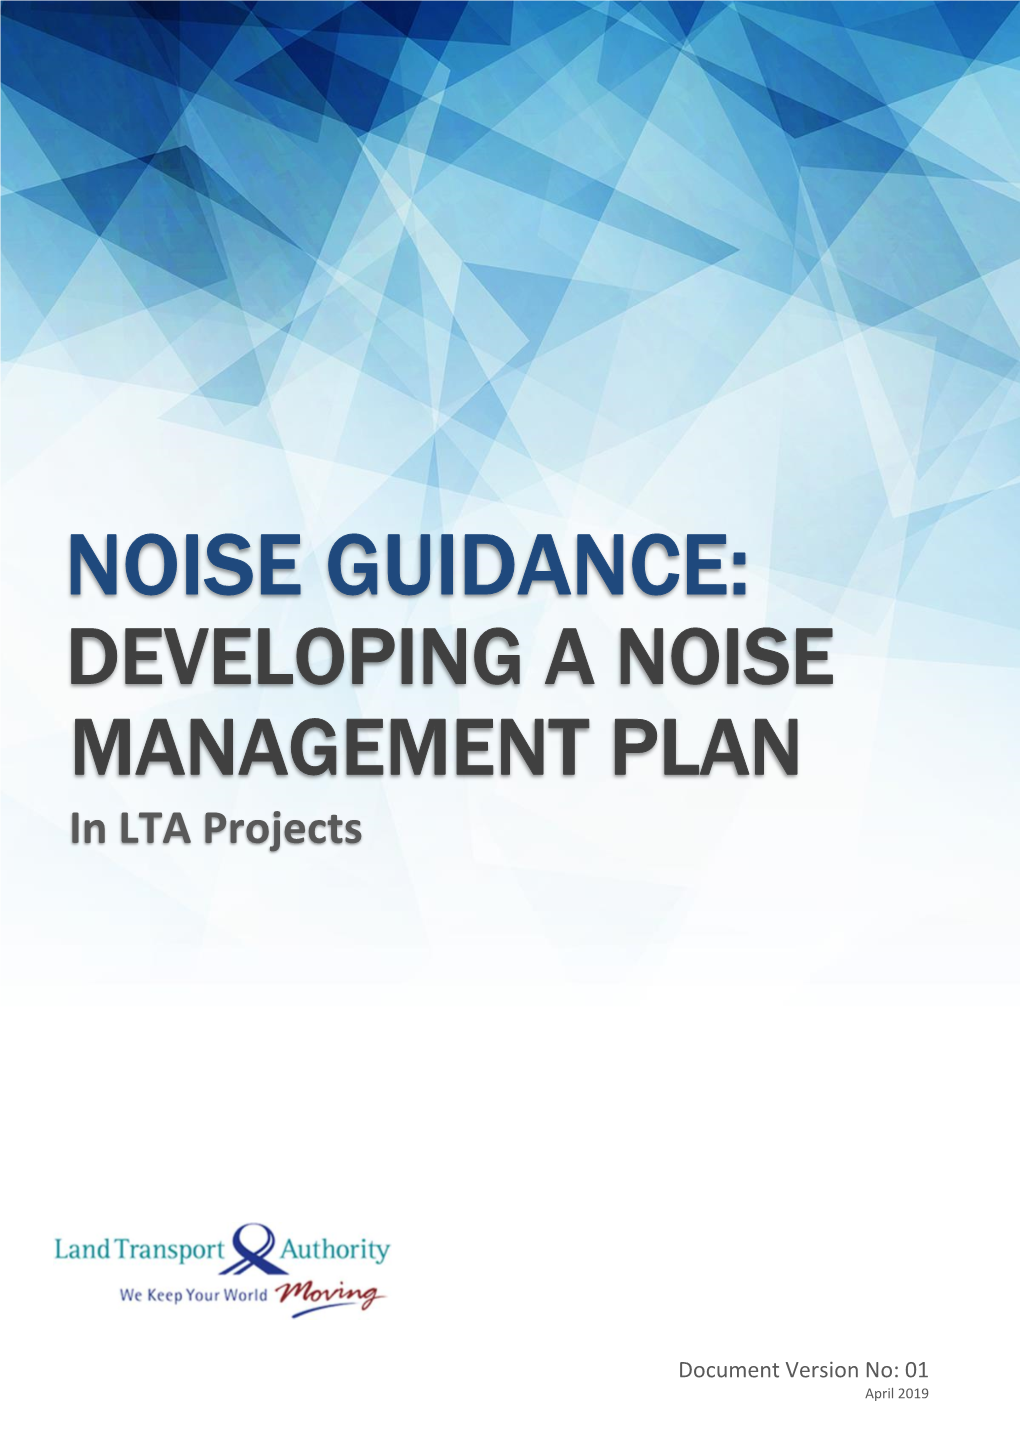 NOISE GUIDANCE: DEVELOPING a NOISE MANAGEMENT PLAN in LTA Projects